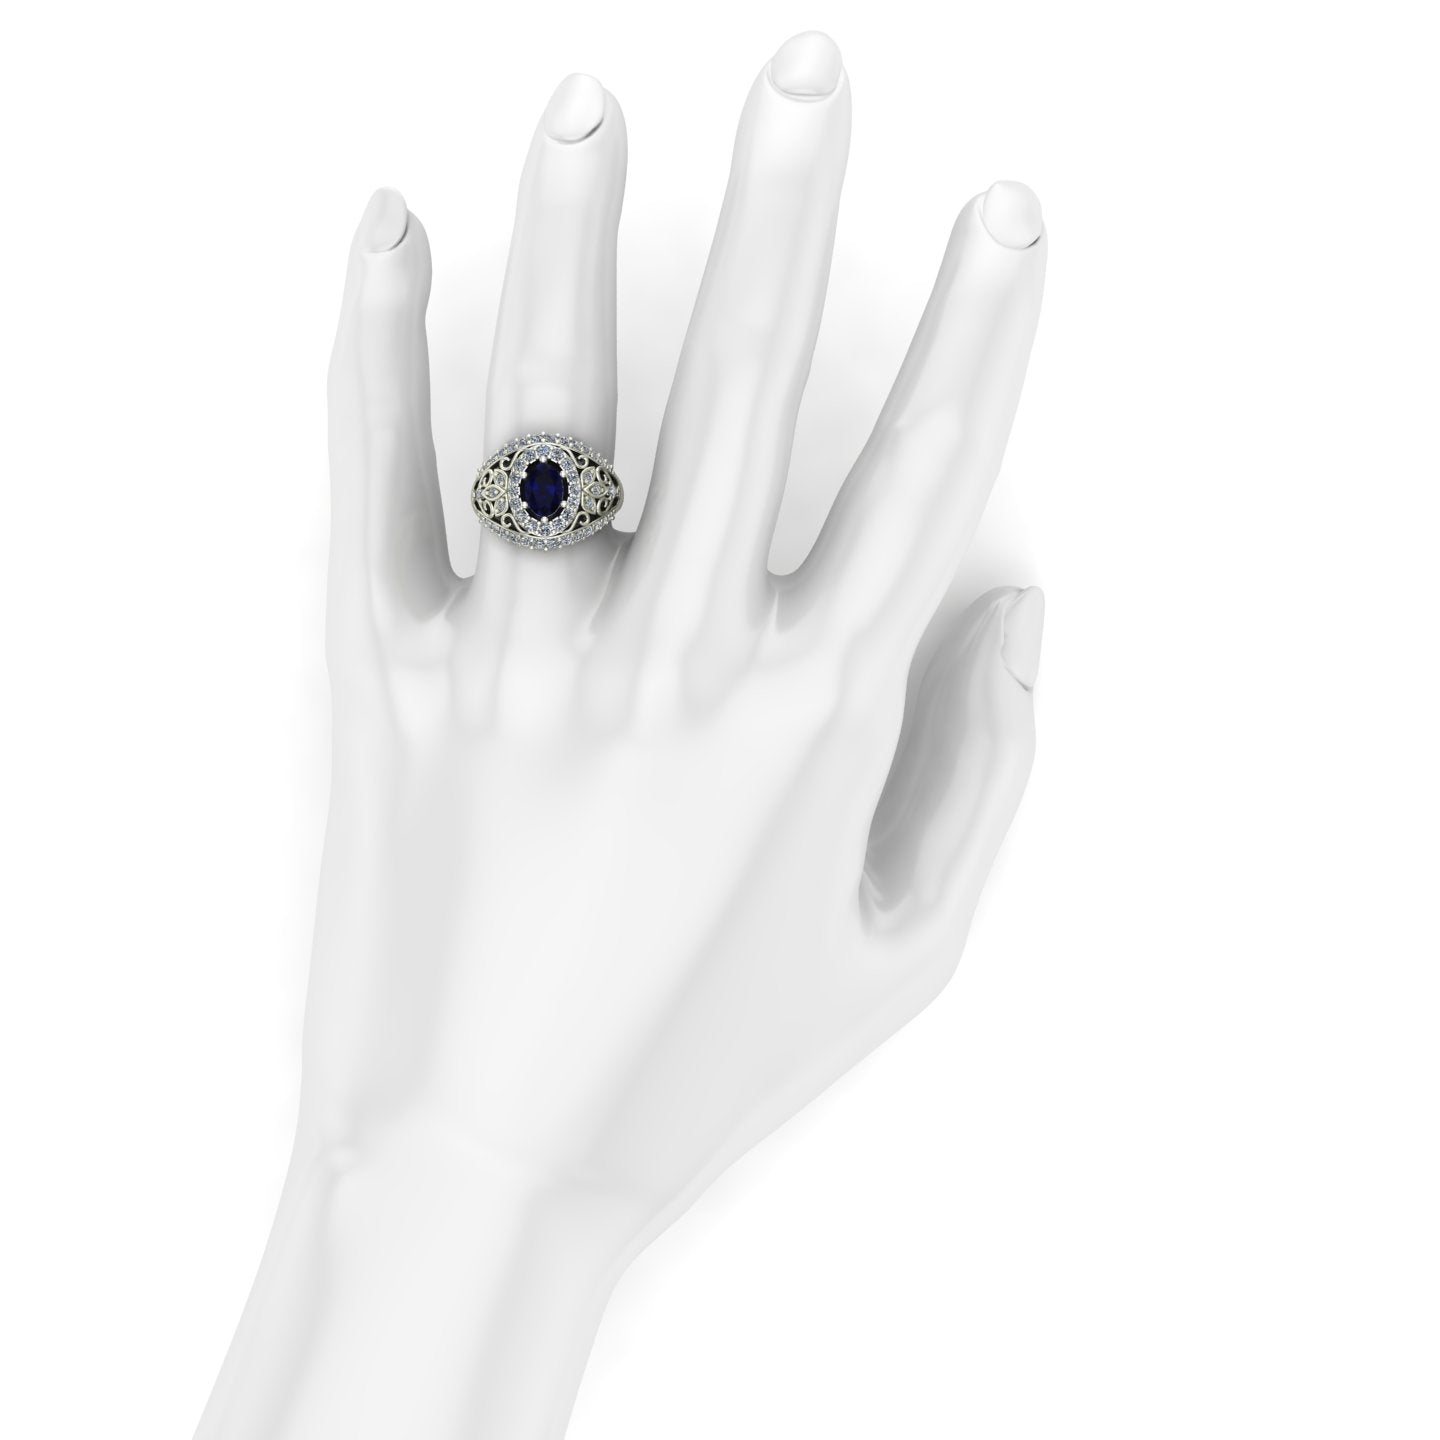 oval blue sapphire and diamond dome ring in 14k white gold - Charles Babb Designs - on hand